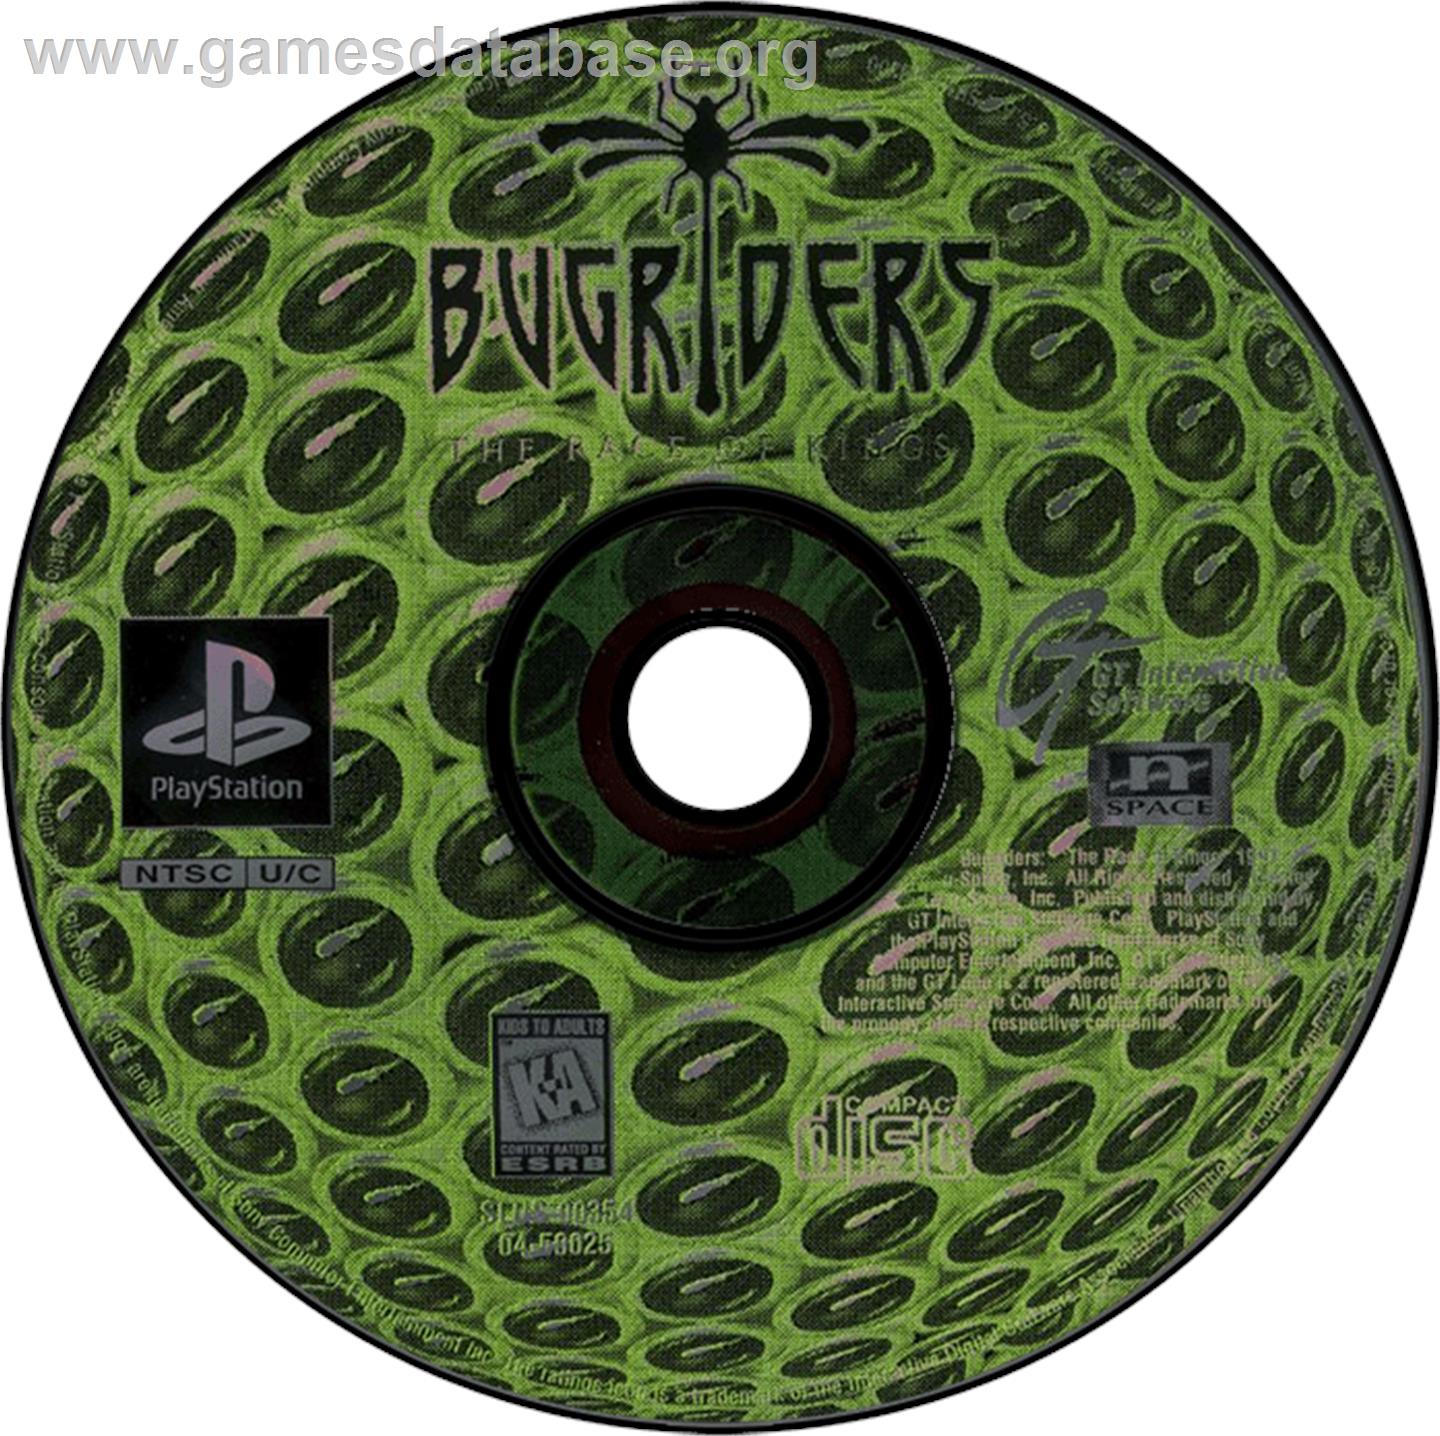 BugRiders: The Race of Kings - Sony Playstation - Artwork - Disc